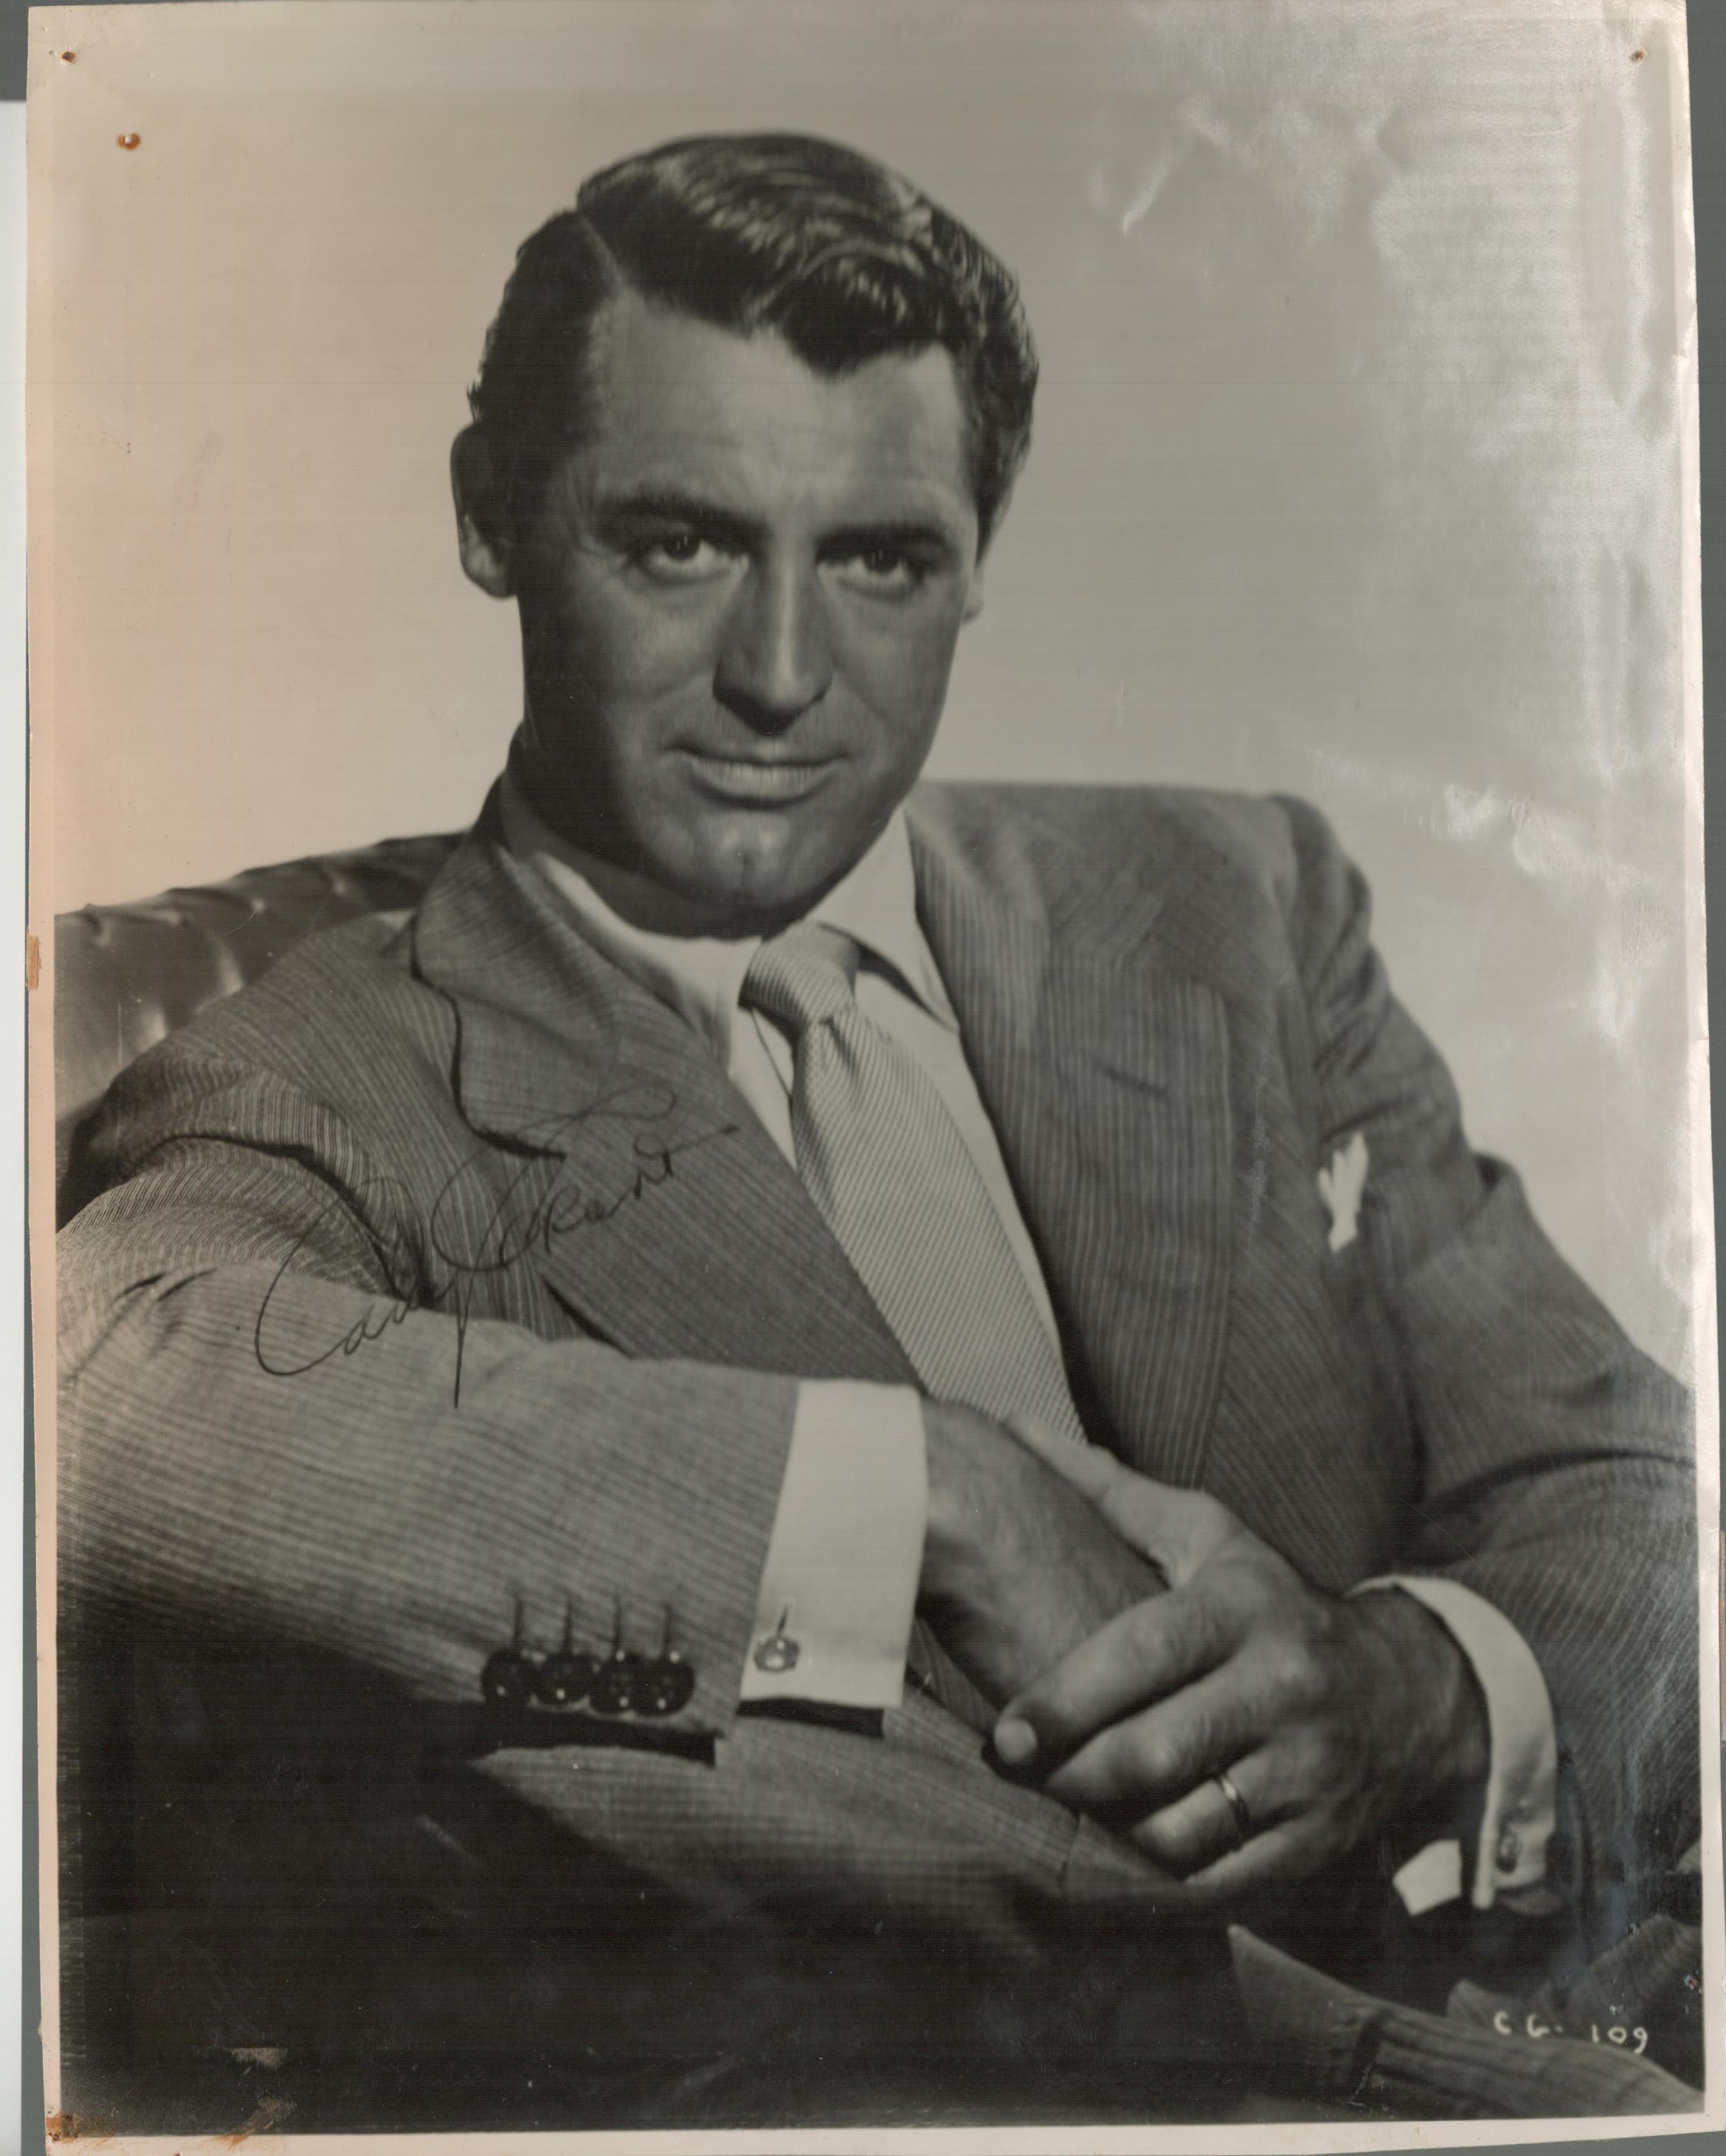 Cary Grant signed 10x8 black and white vintage photo. Good condition. All autographs come with a